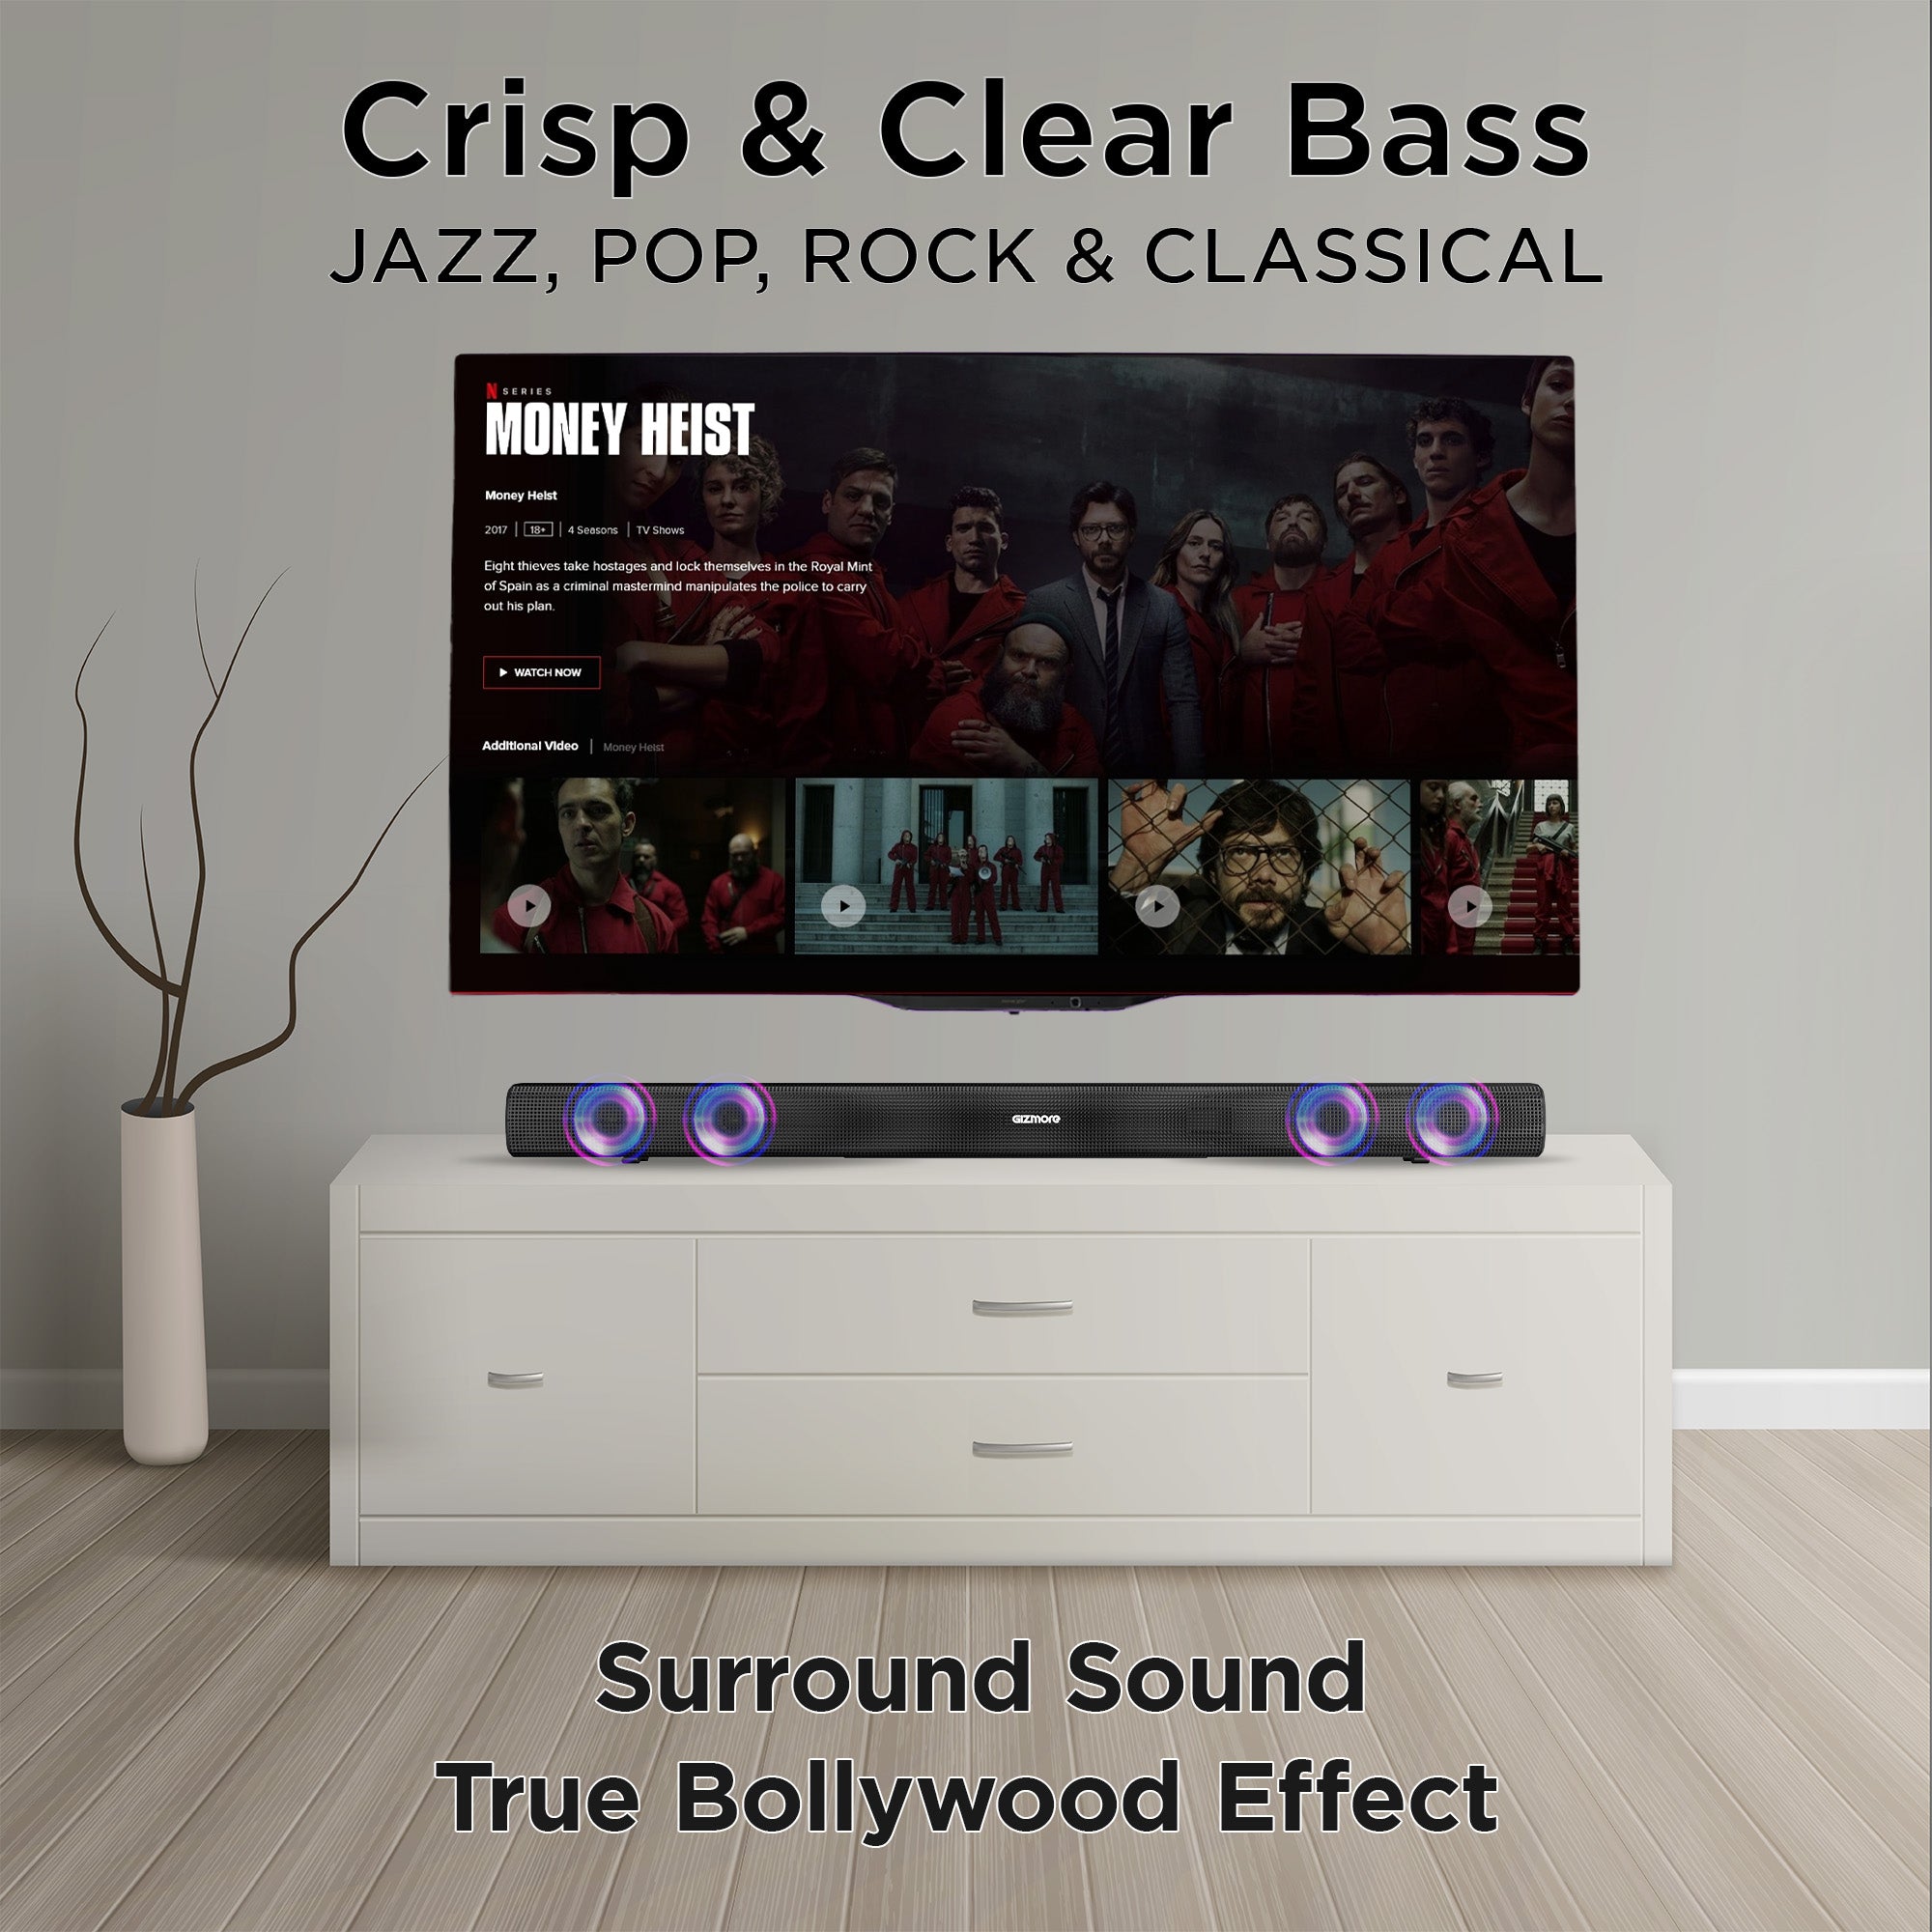 GIZMORE BAR6100 60W RMS Portable Bluetooth Soundbar with 360 Degree Surround Sound & Extra Deep Bass| Wall Mounted| Multi Connectivity & Remote Control connect with Mobile/TV/PC and Projector